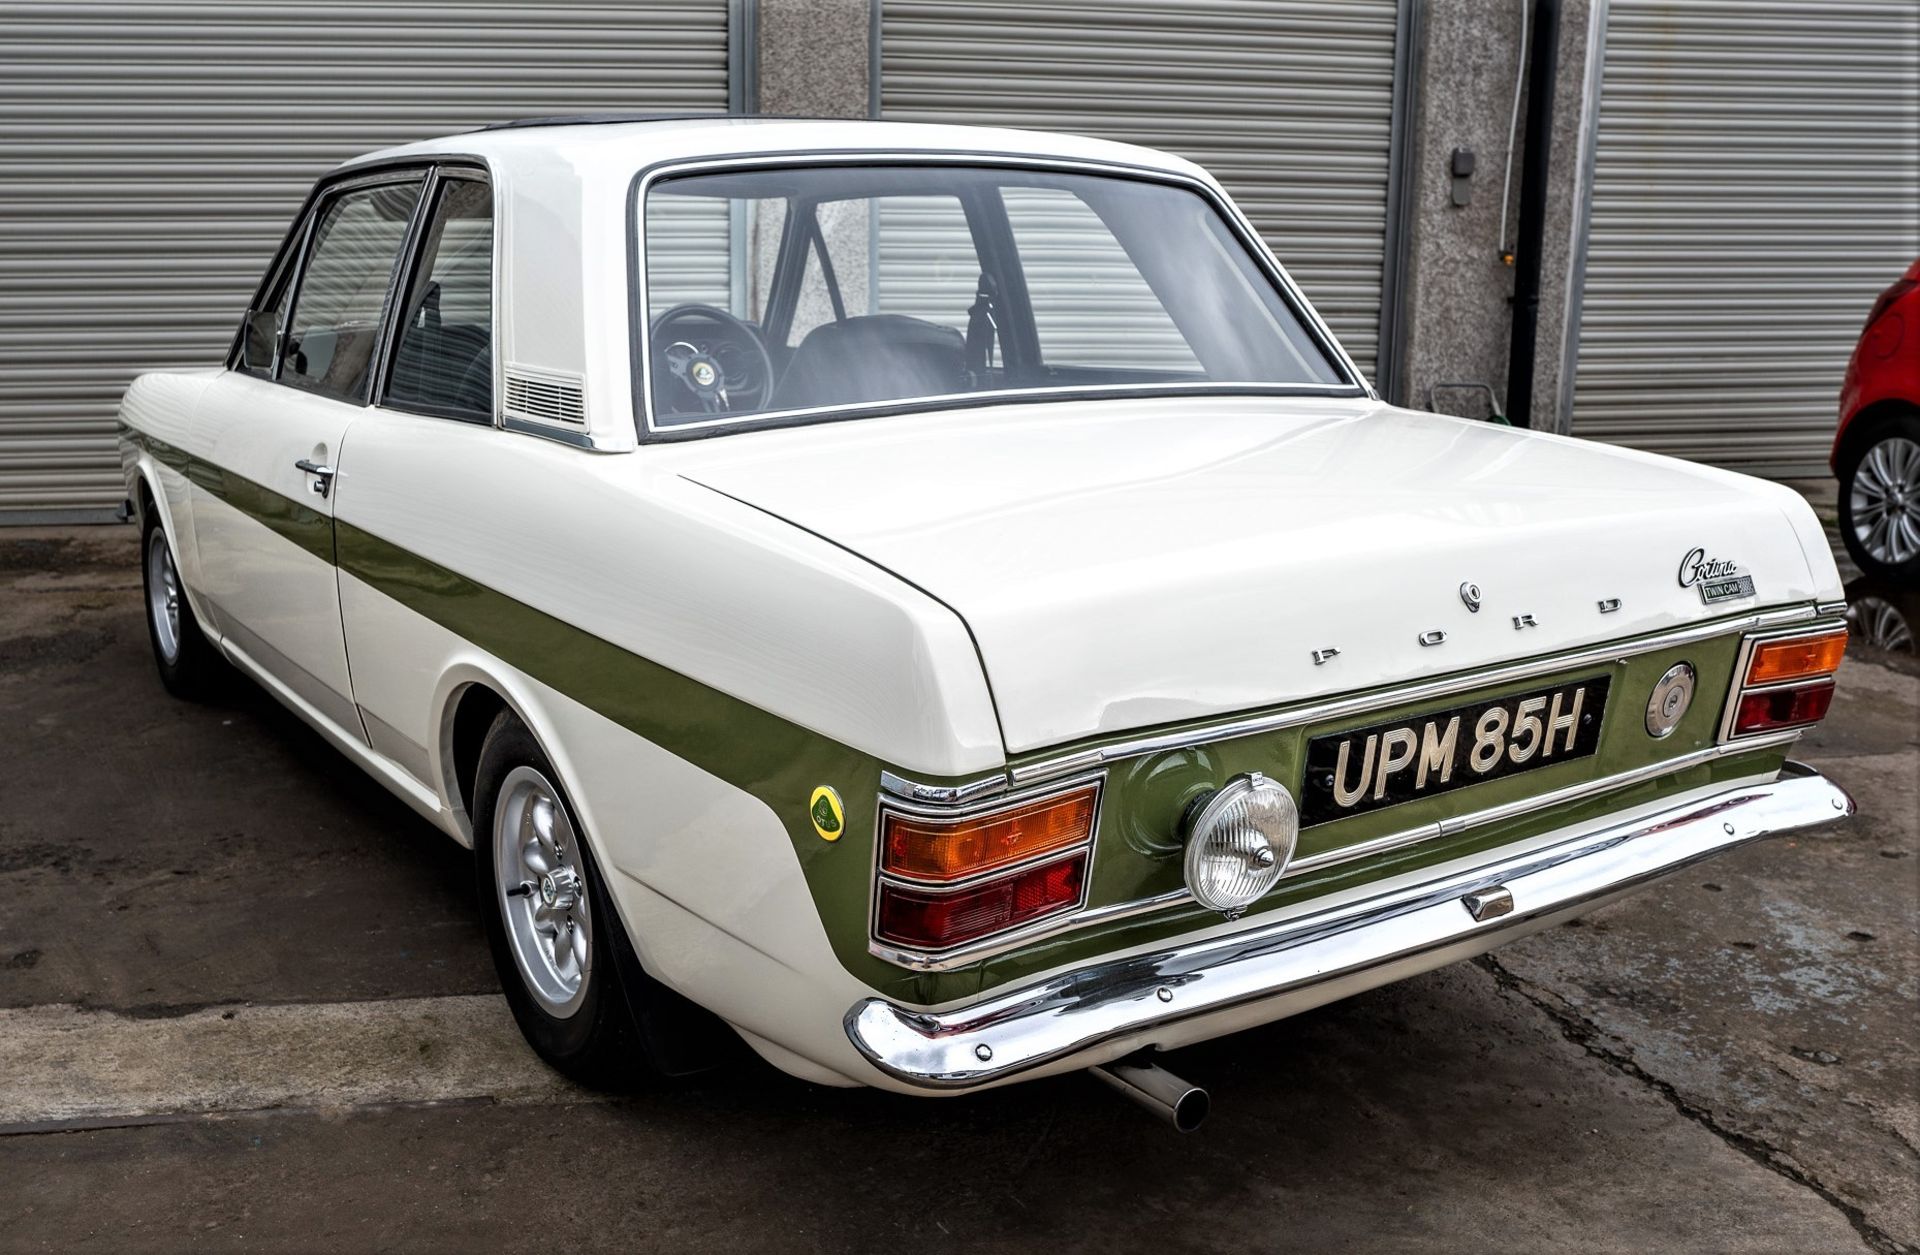 1970 FORD CORTINA LOTUS Chassis Number: BA91HS25847 Registration Number: UPM 85H - Ex-East Sussex - Image 4 of 16